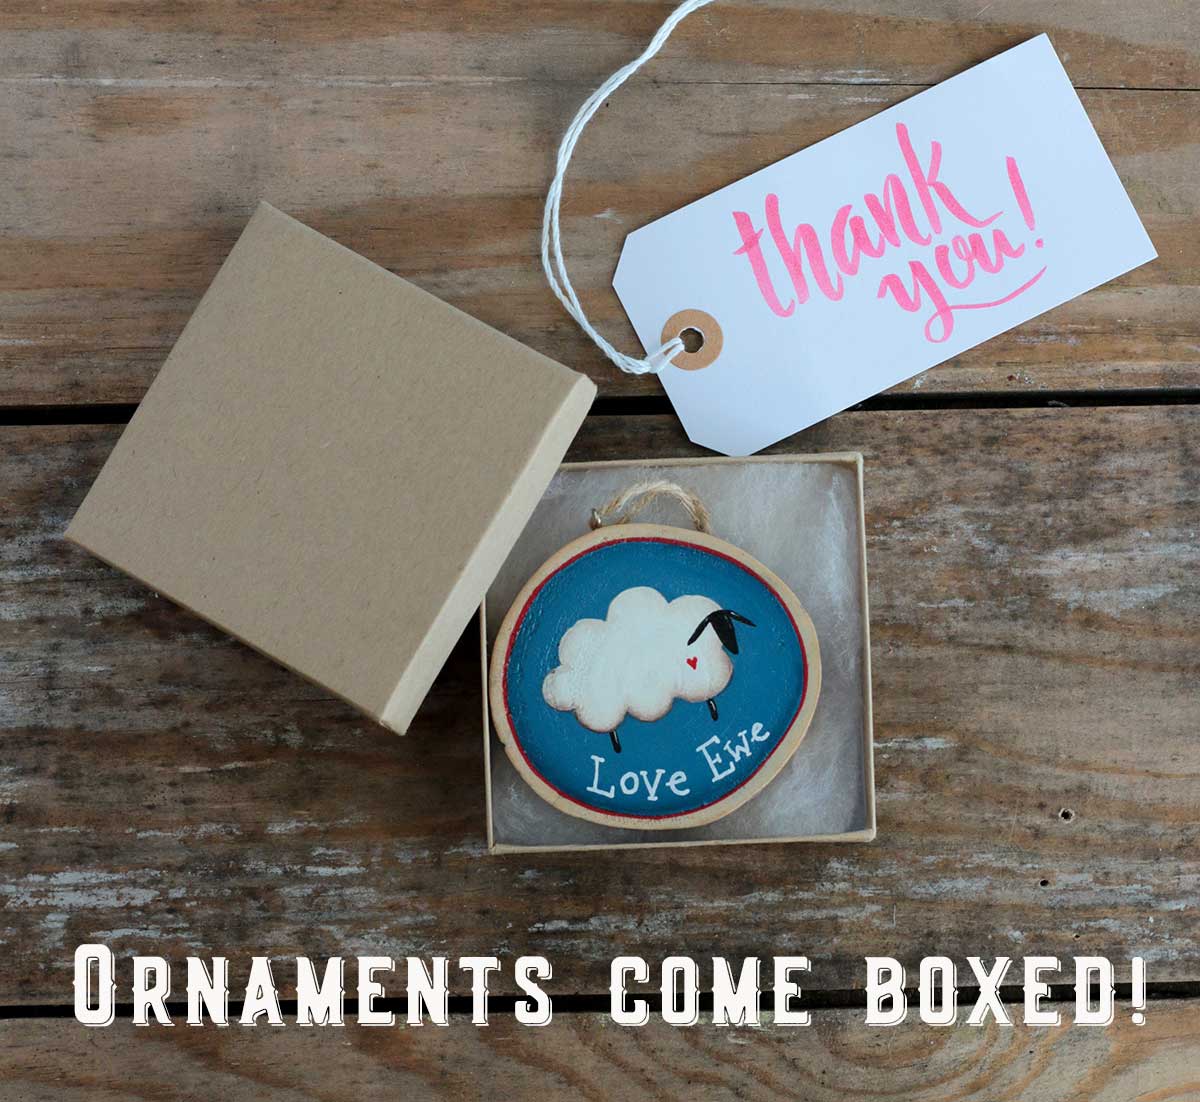 Ornaments come gift boxed!